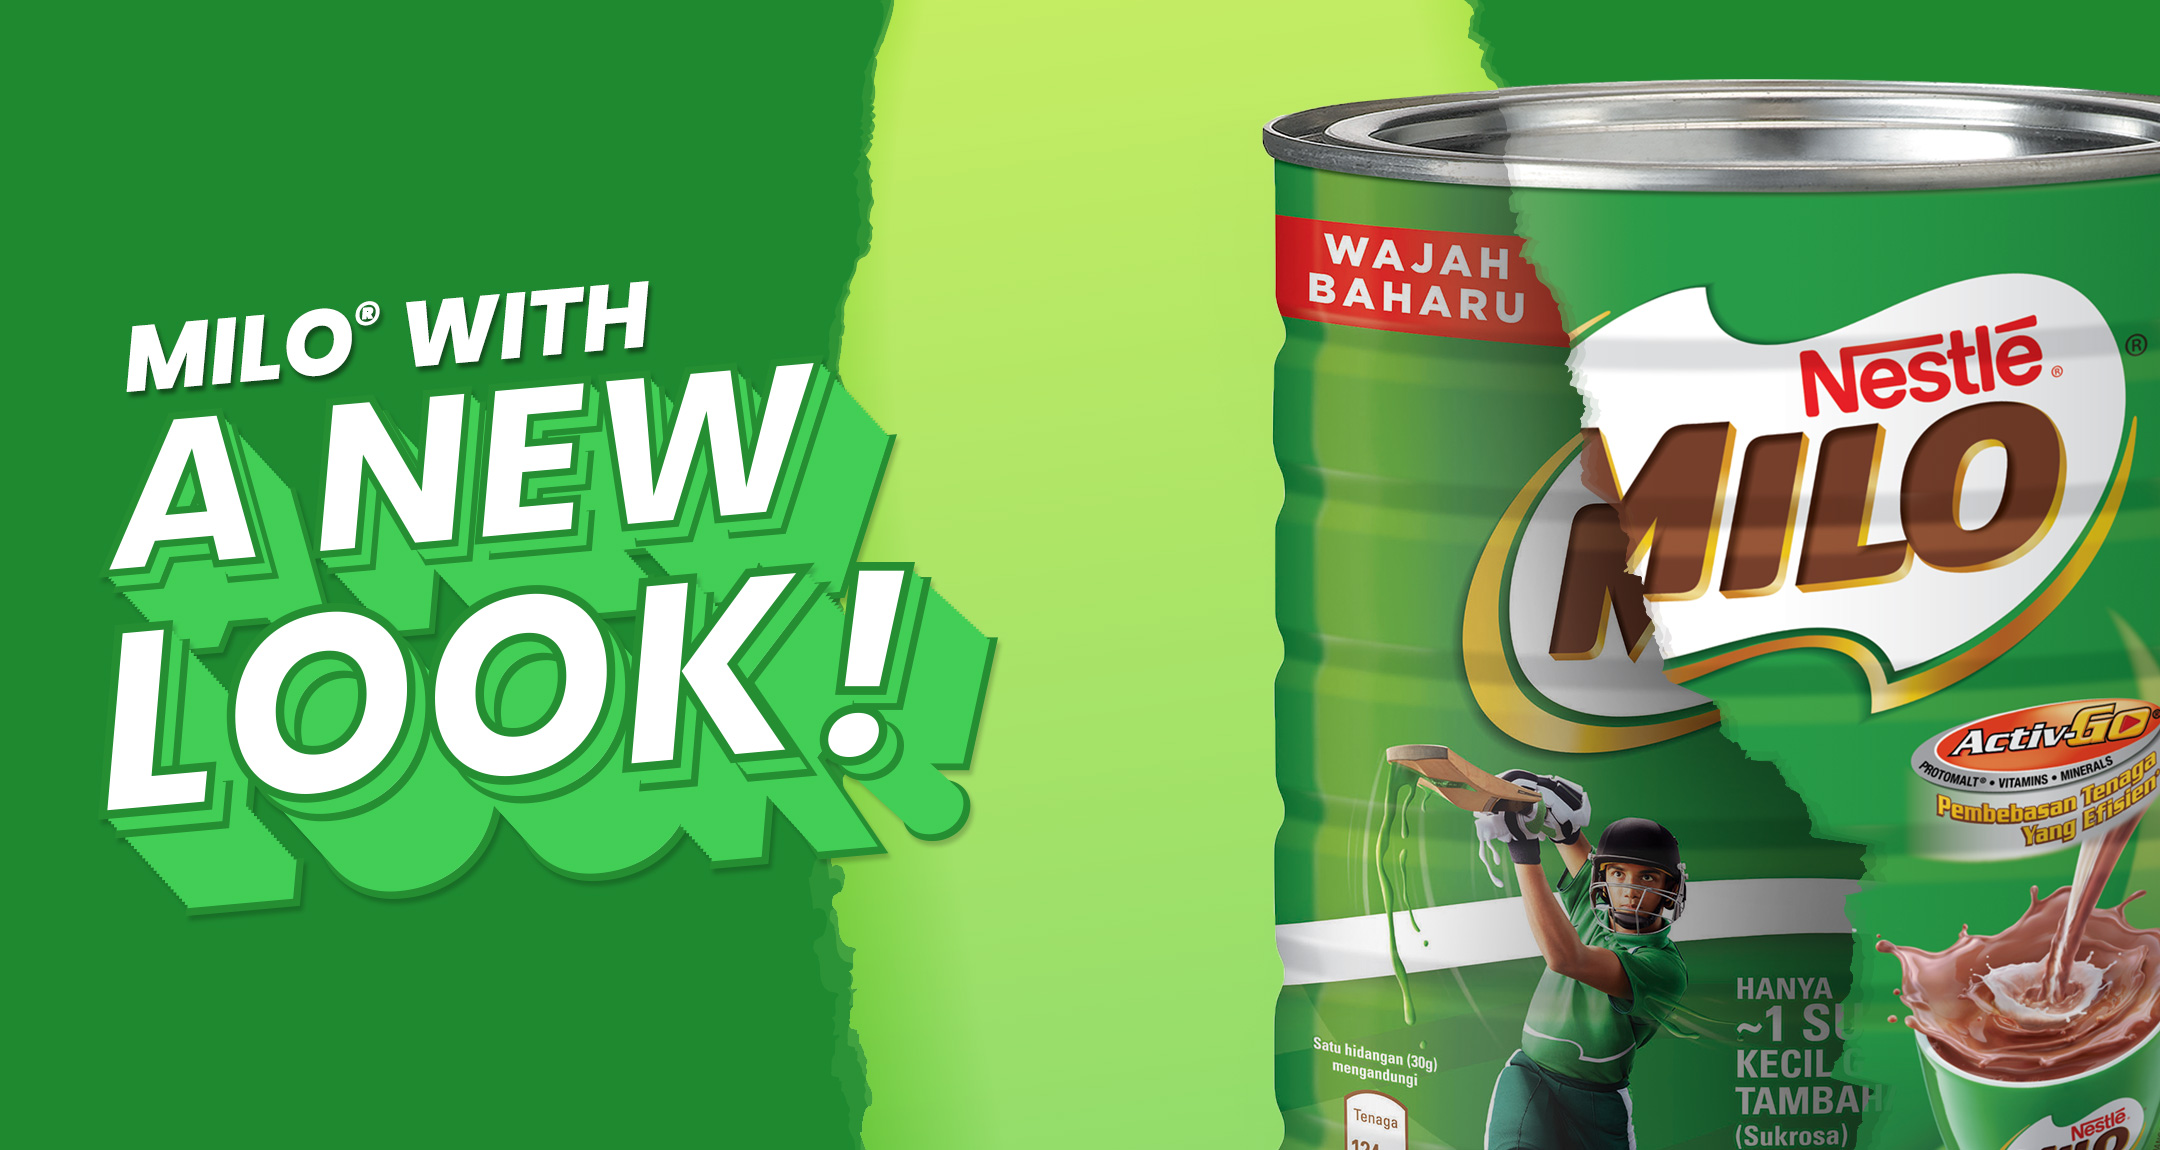 MILO® with a new look!